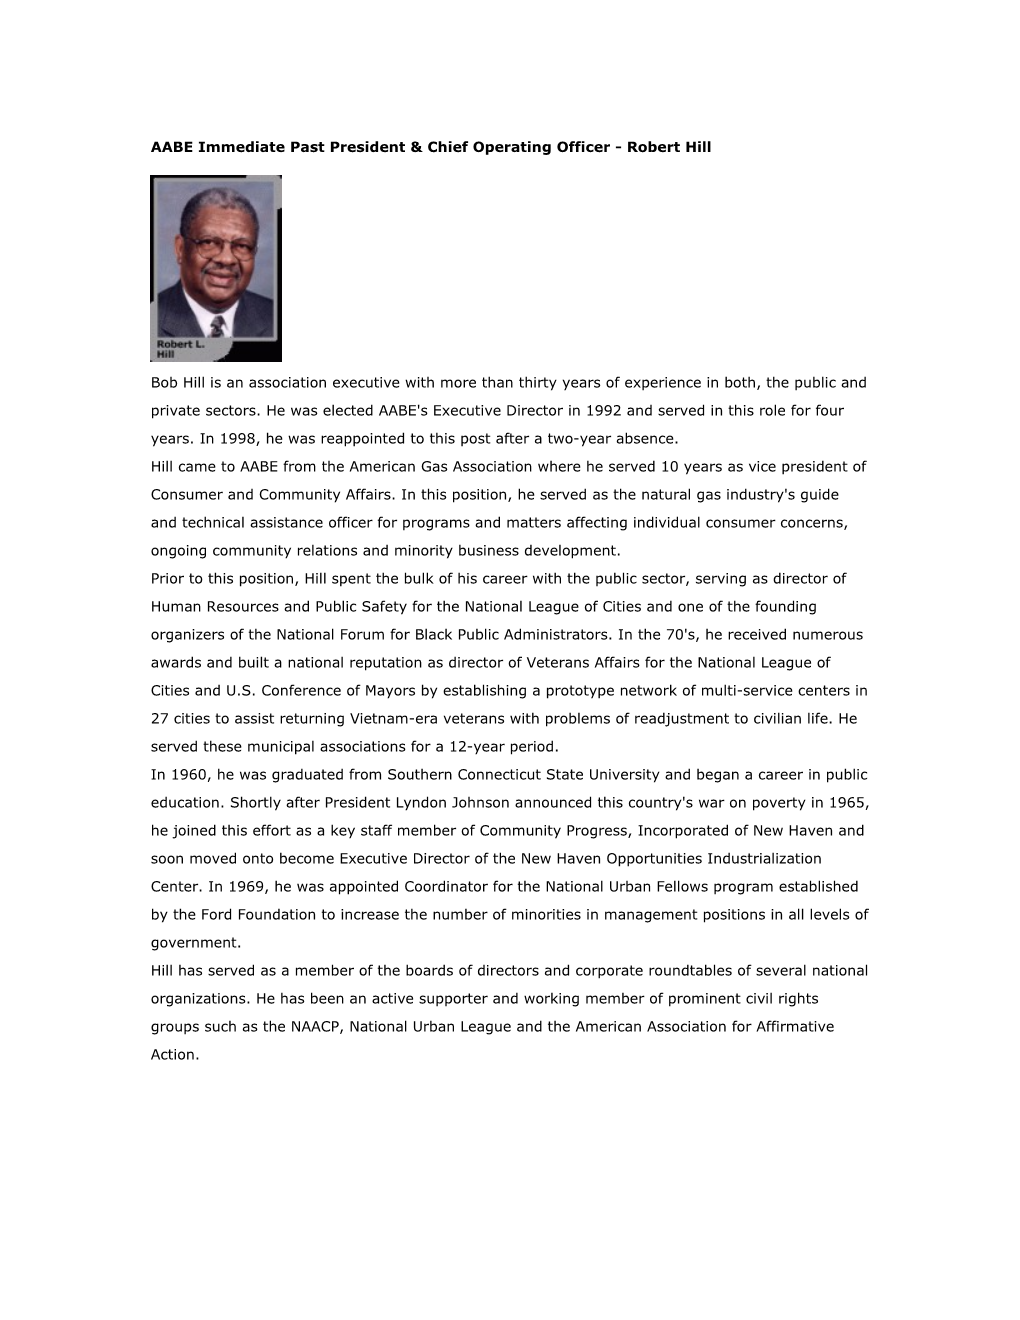 AABE Immediate Past President & Chief Operating Officer - Robert Hill